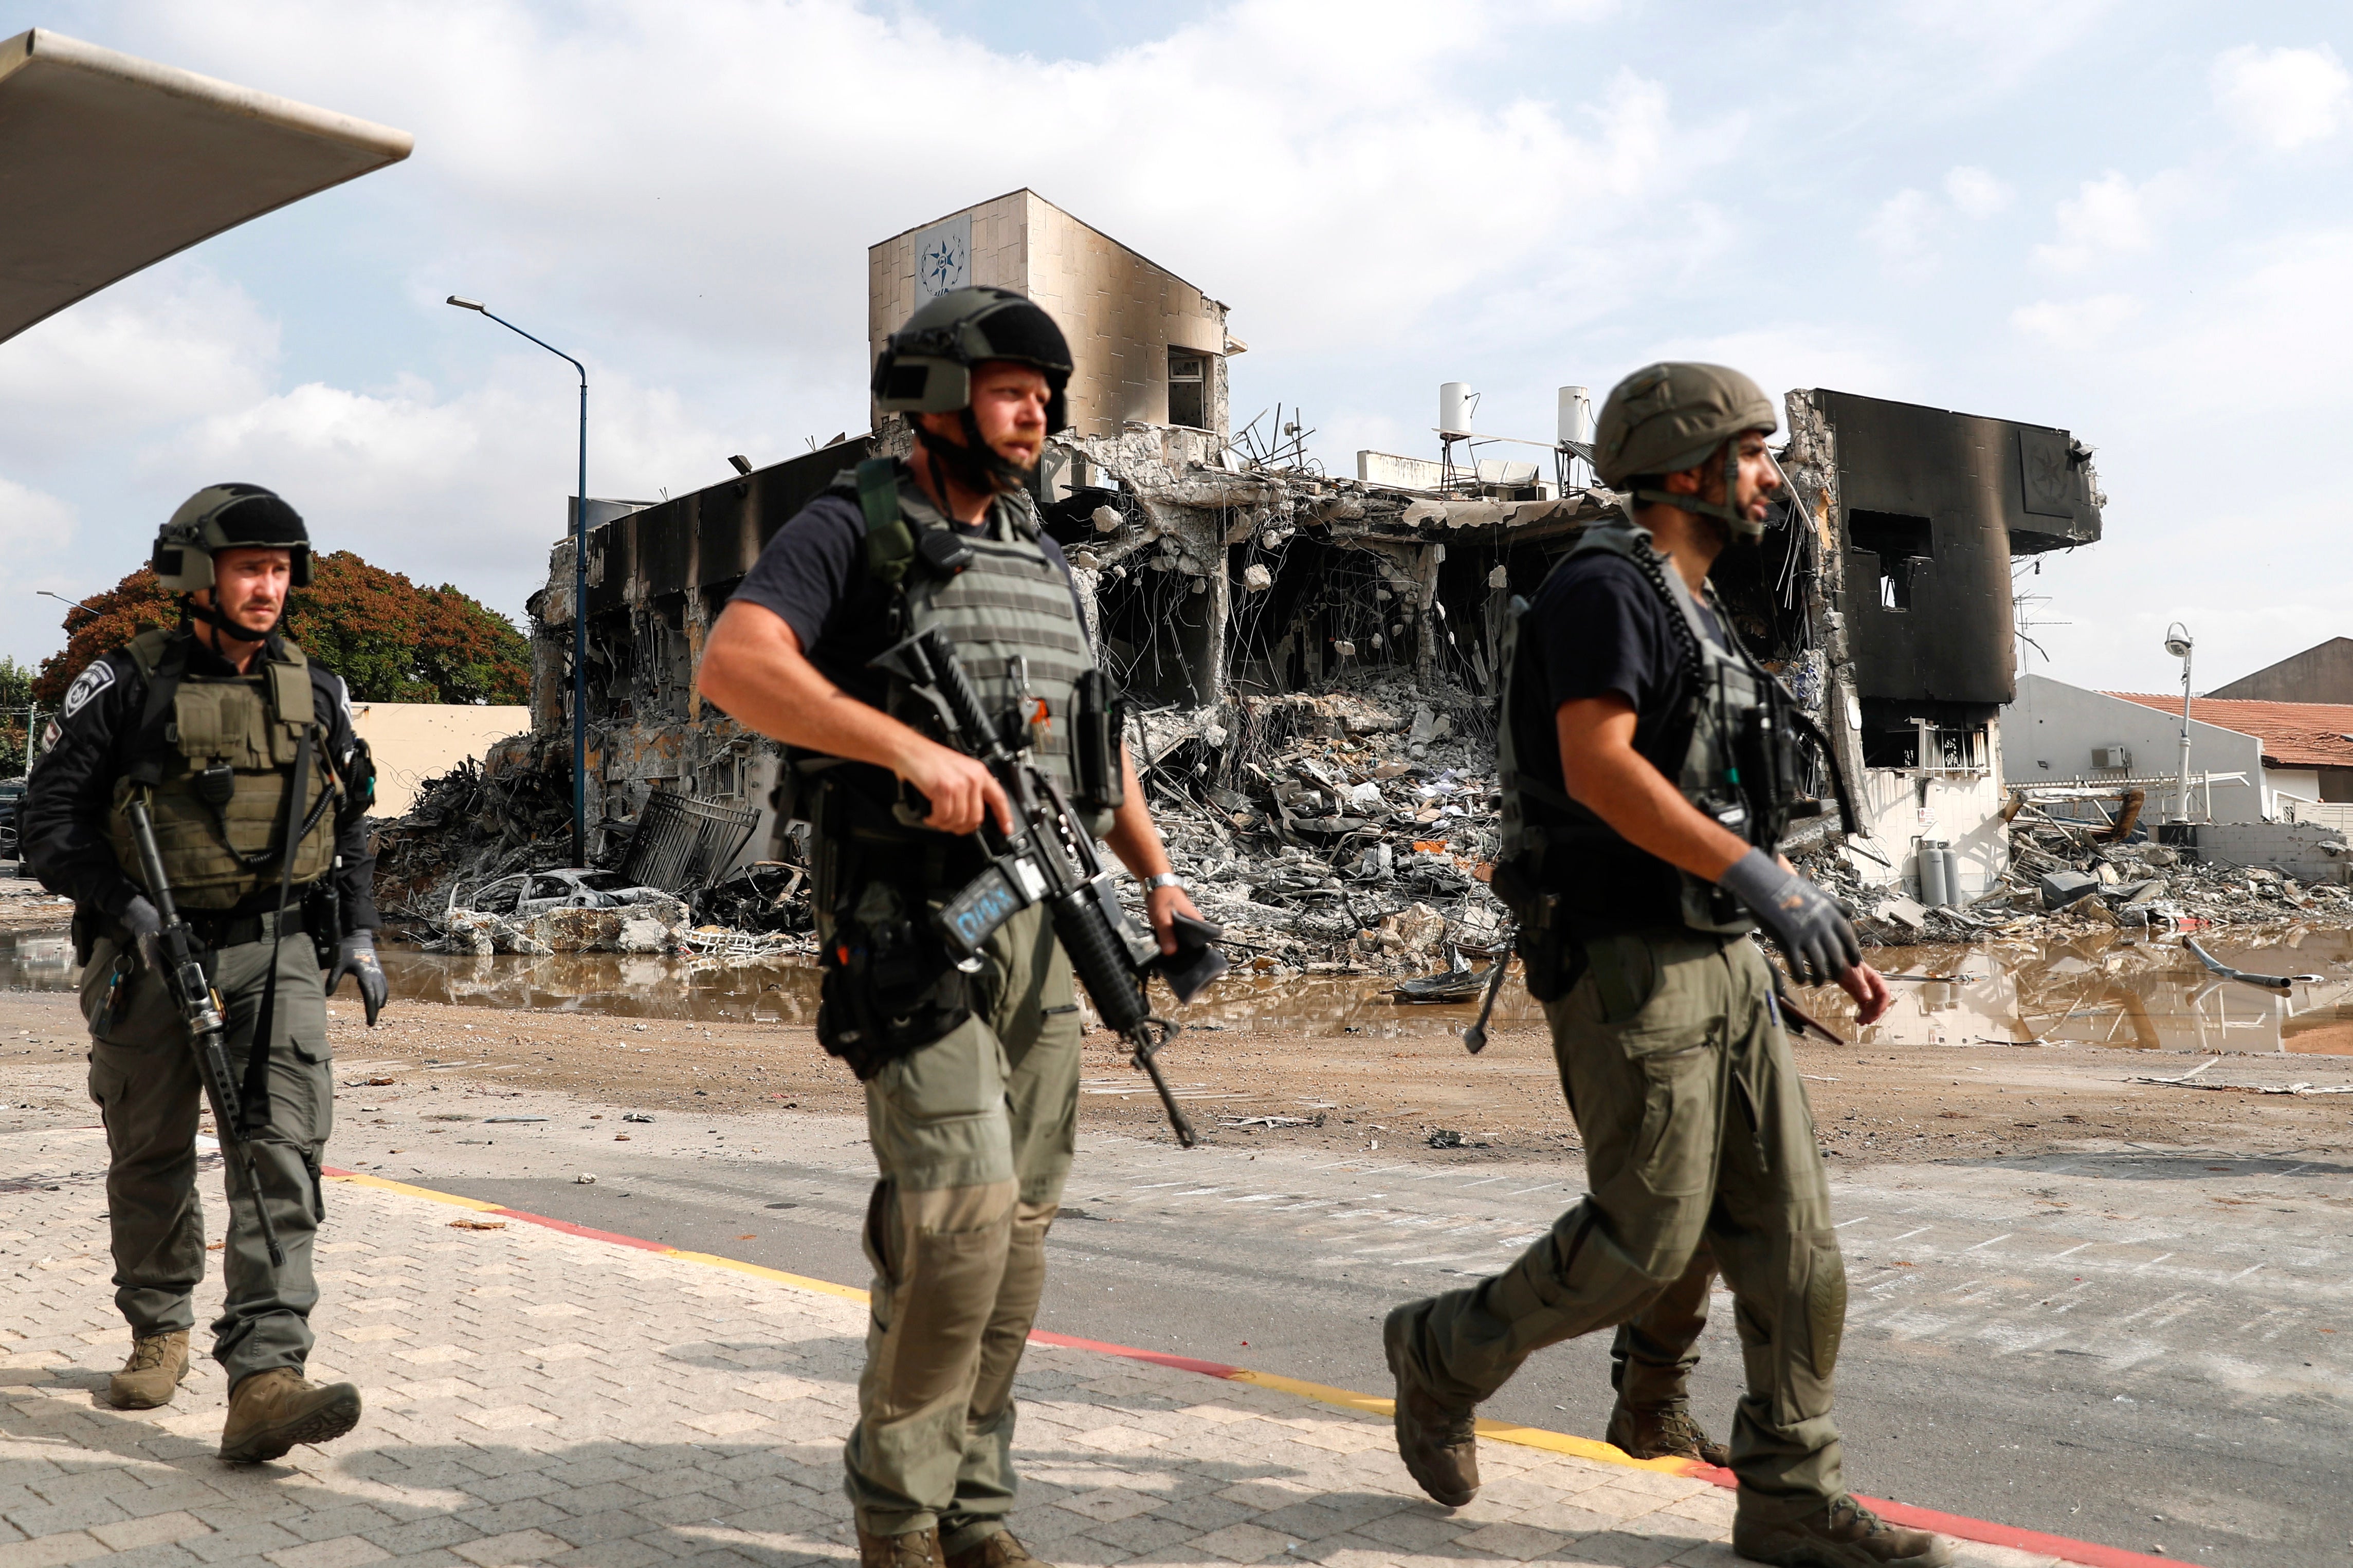 Israeli security forces patrol outside the destroyed police station that was controlled by Hamas militants in the southern city of Sderot, close to the Gaza border, on Sunday